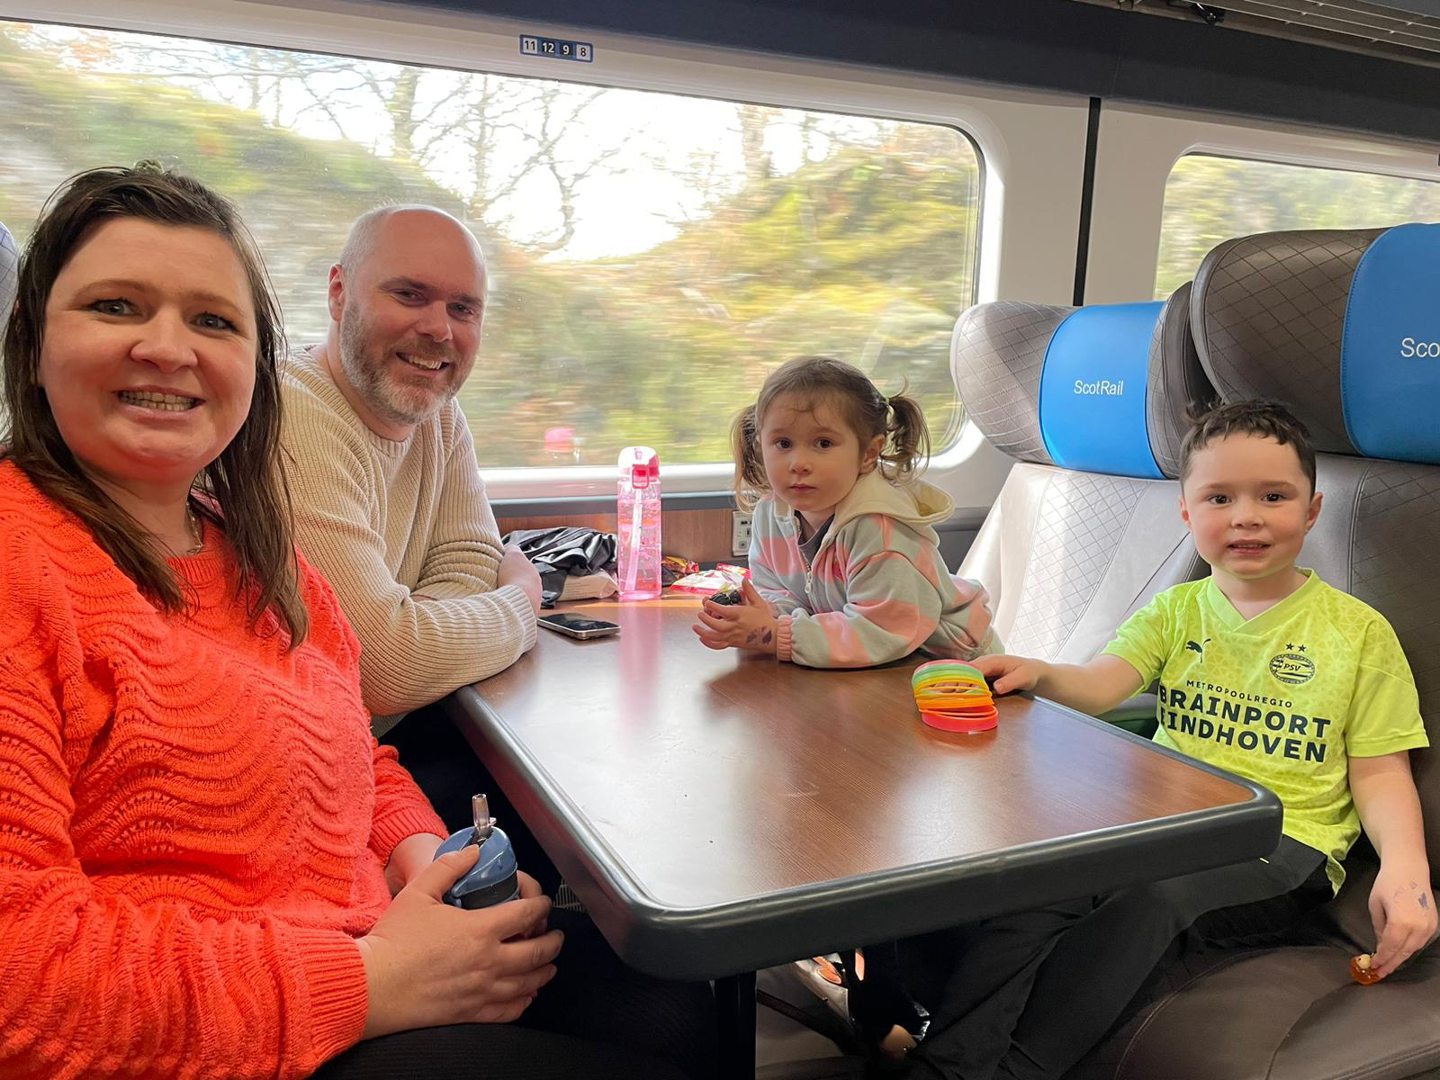 The Scott family on the train on the Harry Potter line.